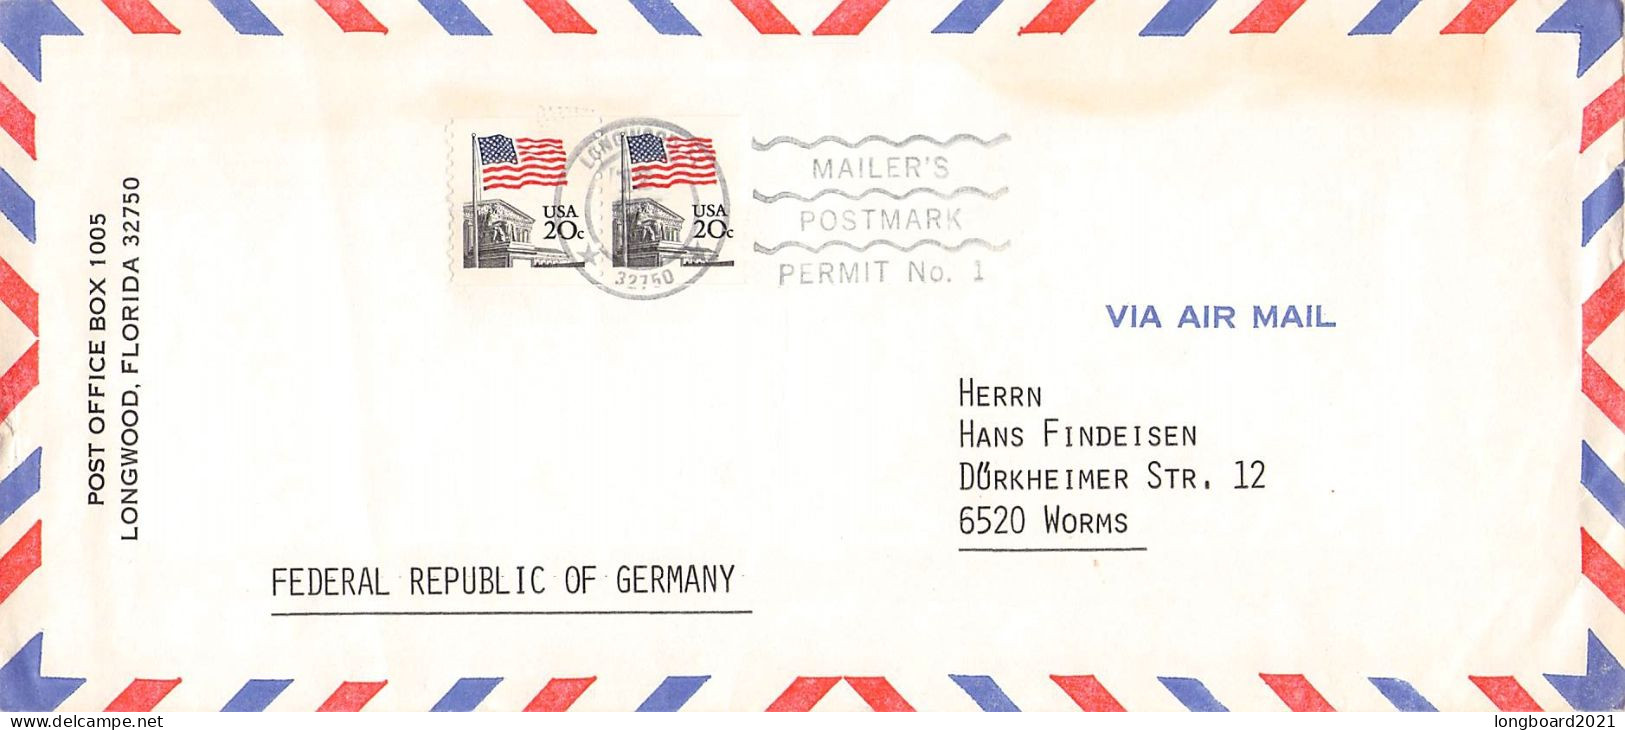 USA - COLLECTION MAIL & POSTAL STATIONERY / 6006